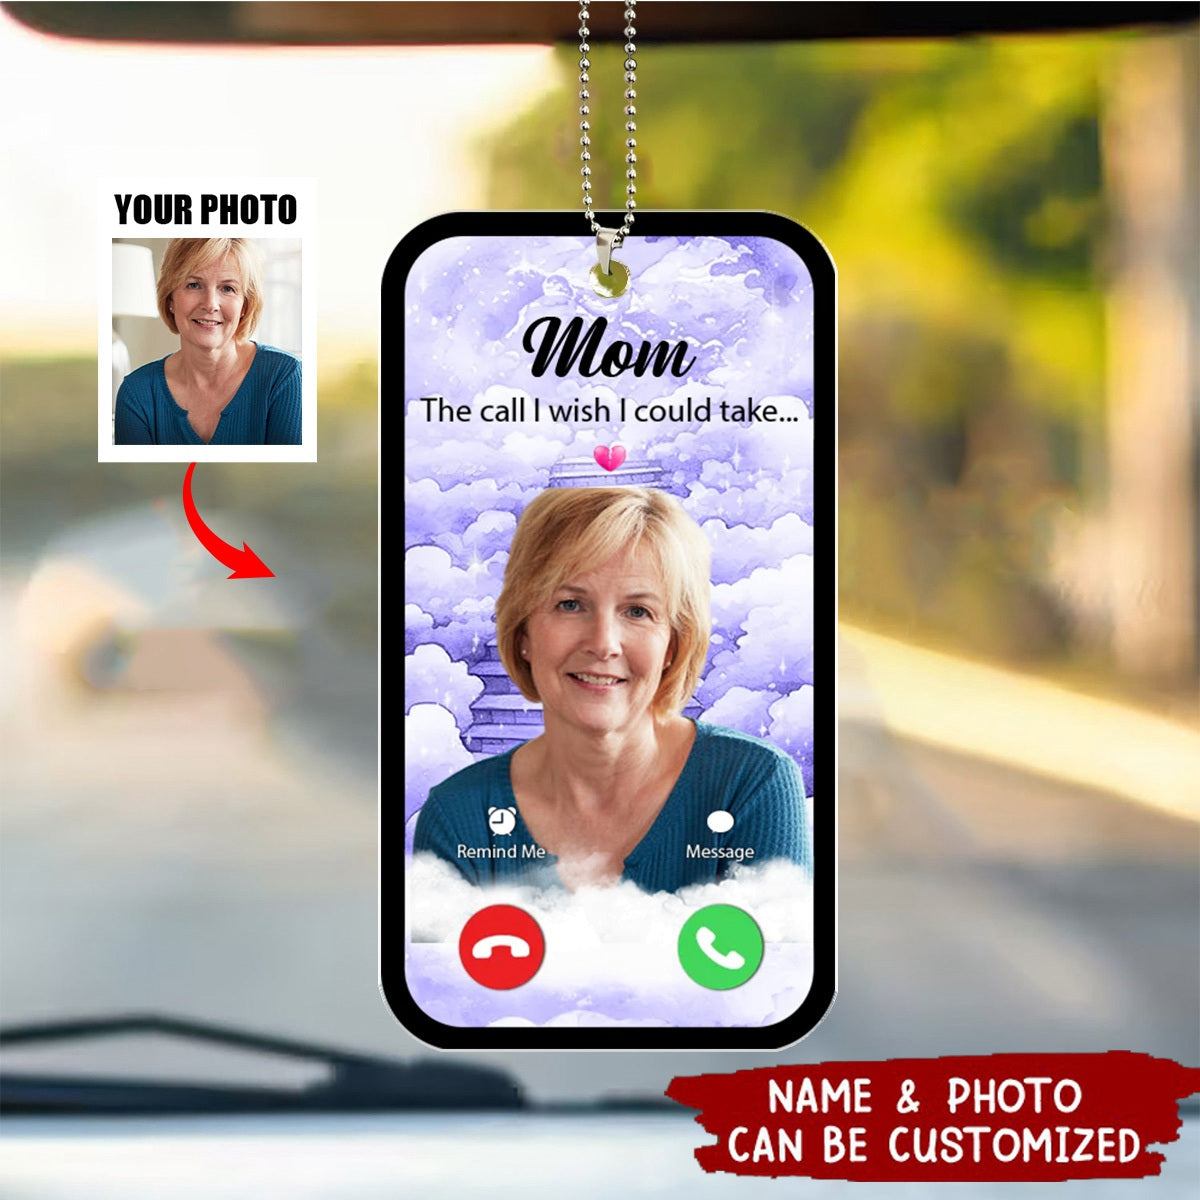 The Call I Wish I Could Take Memorial Gift - Blue Sky Personalized Car Ornament